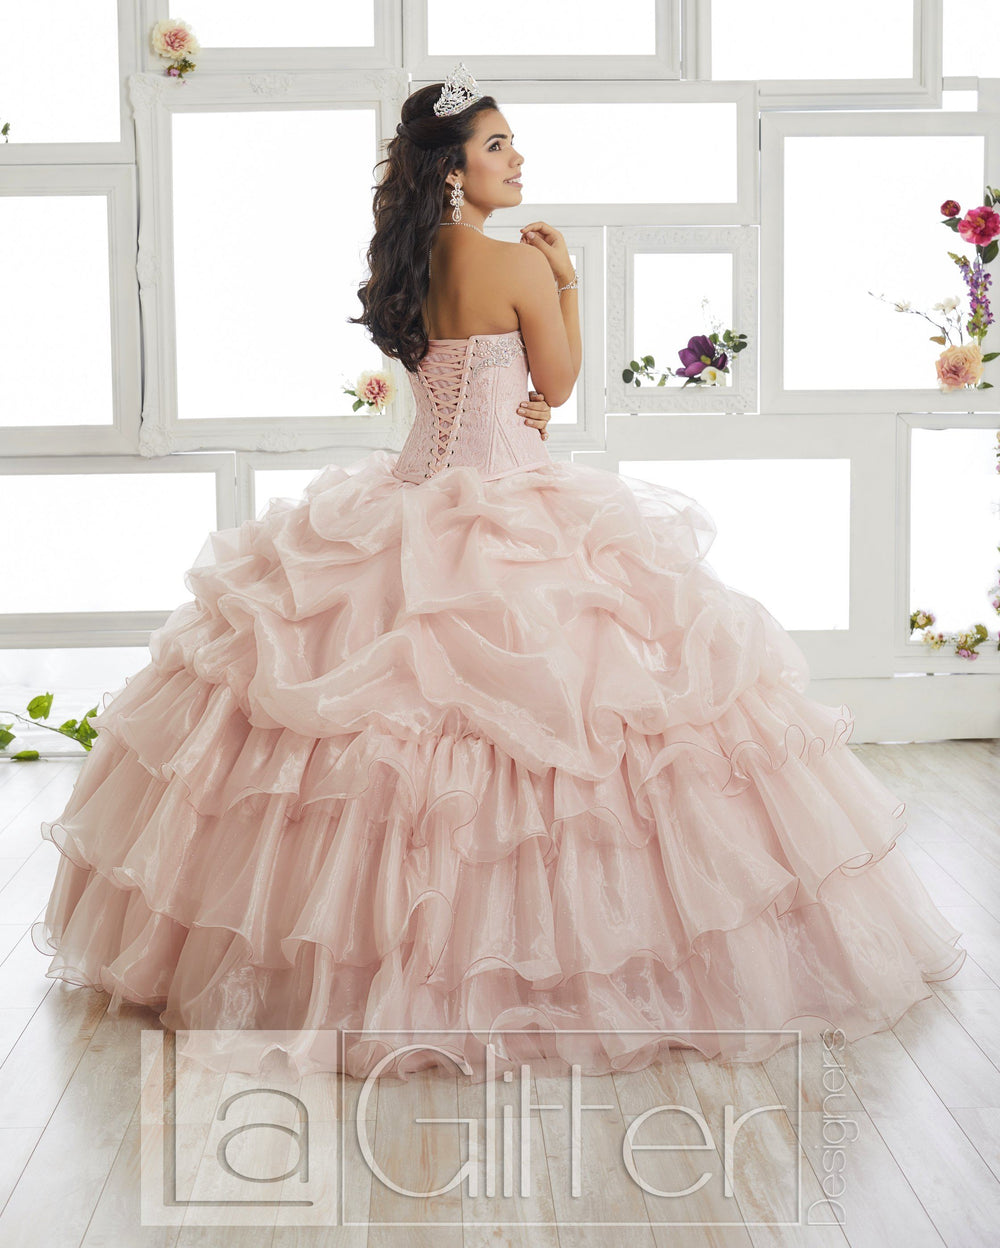 Lace Bodice Strapless Dress by House of Wu LA Glitter 24014-Quinceanera Dresses-ABC Fashion